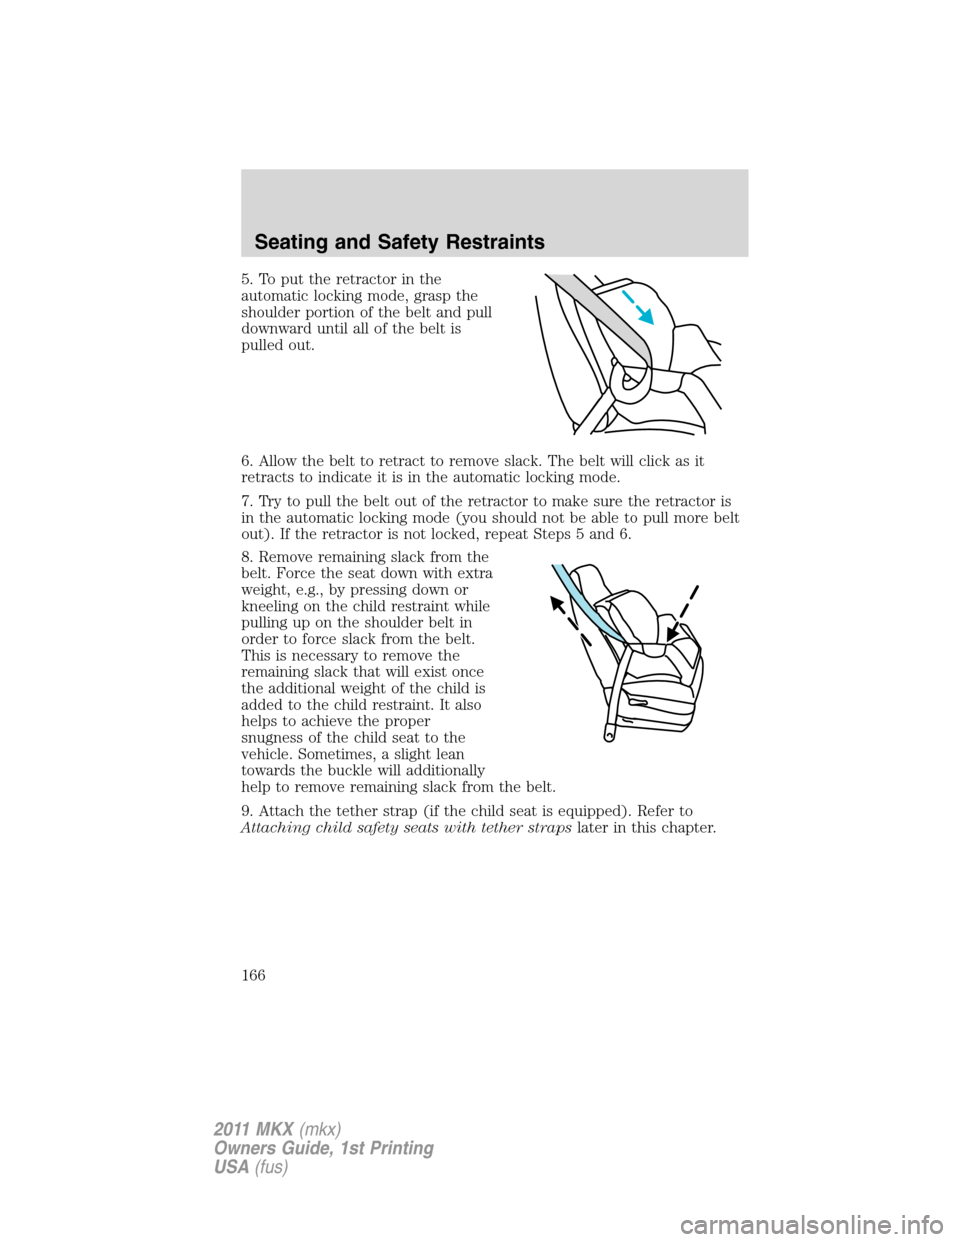 LINCOLN MKX 2011 Owners Manual 5. To put the retractor in the
automatic locking mode, grasp the
shoulder portion of the belt and pull
downward until all of the belt is
pulled out.
6. Allow the belt to retract to remove slack. The b